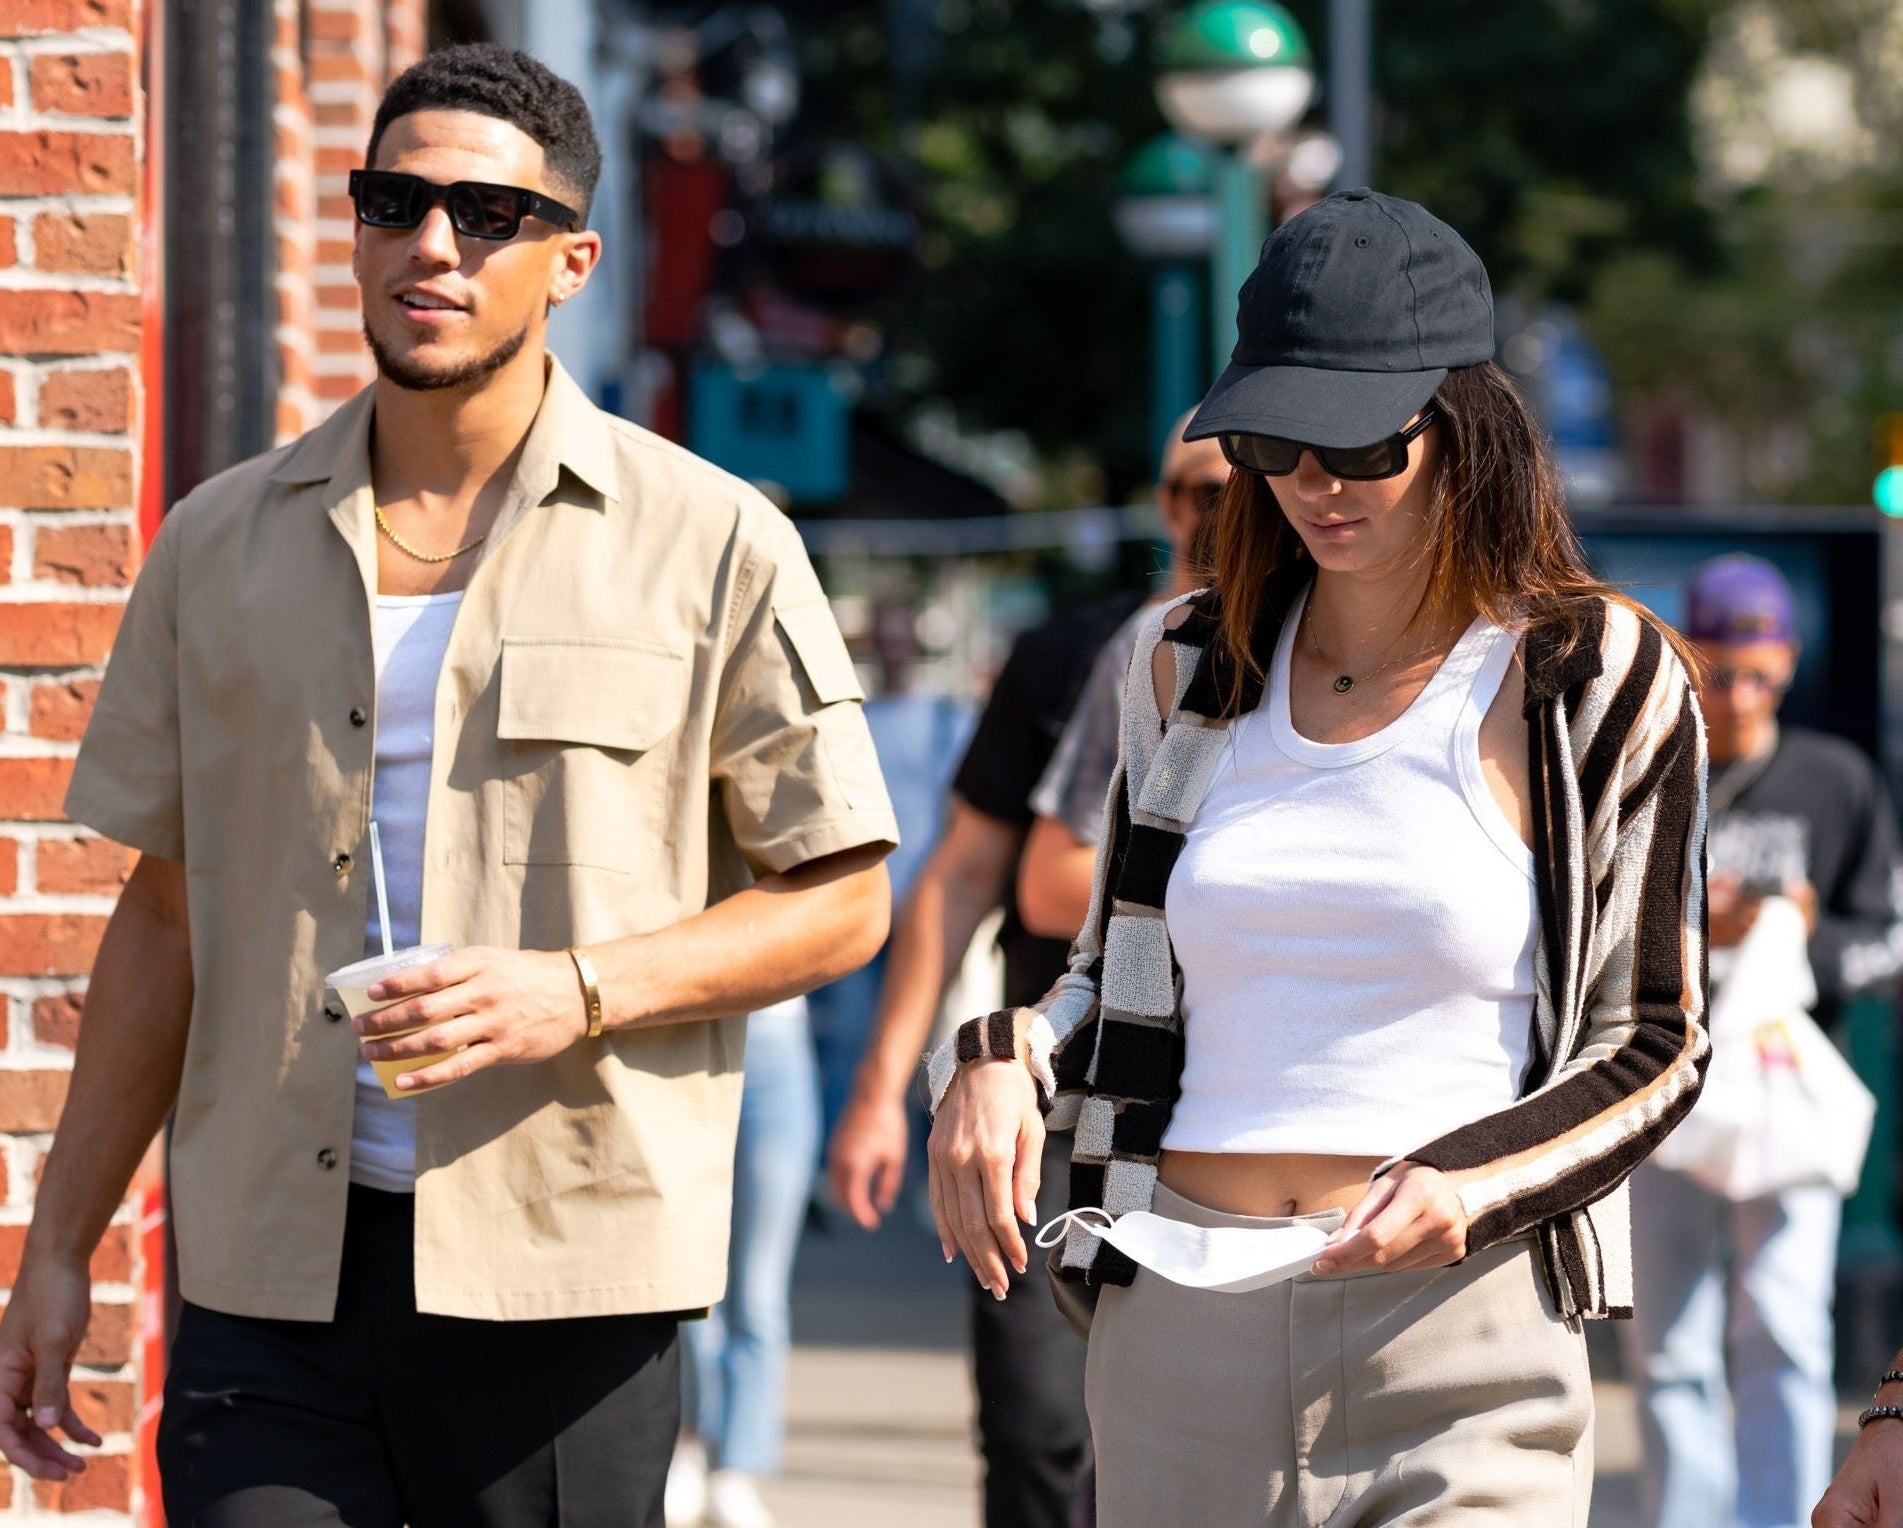 A close-up of Kendall and Devin outside walking together